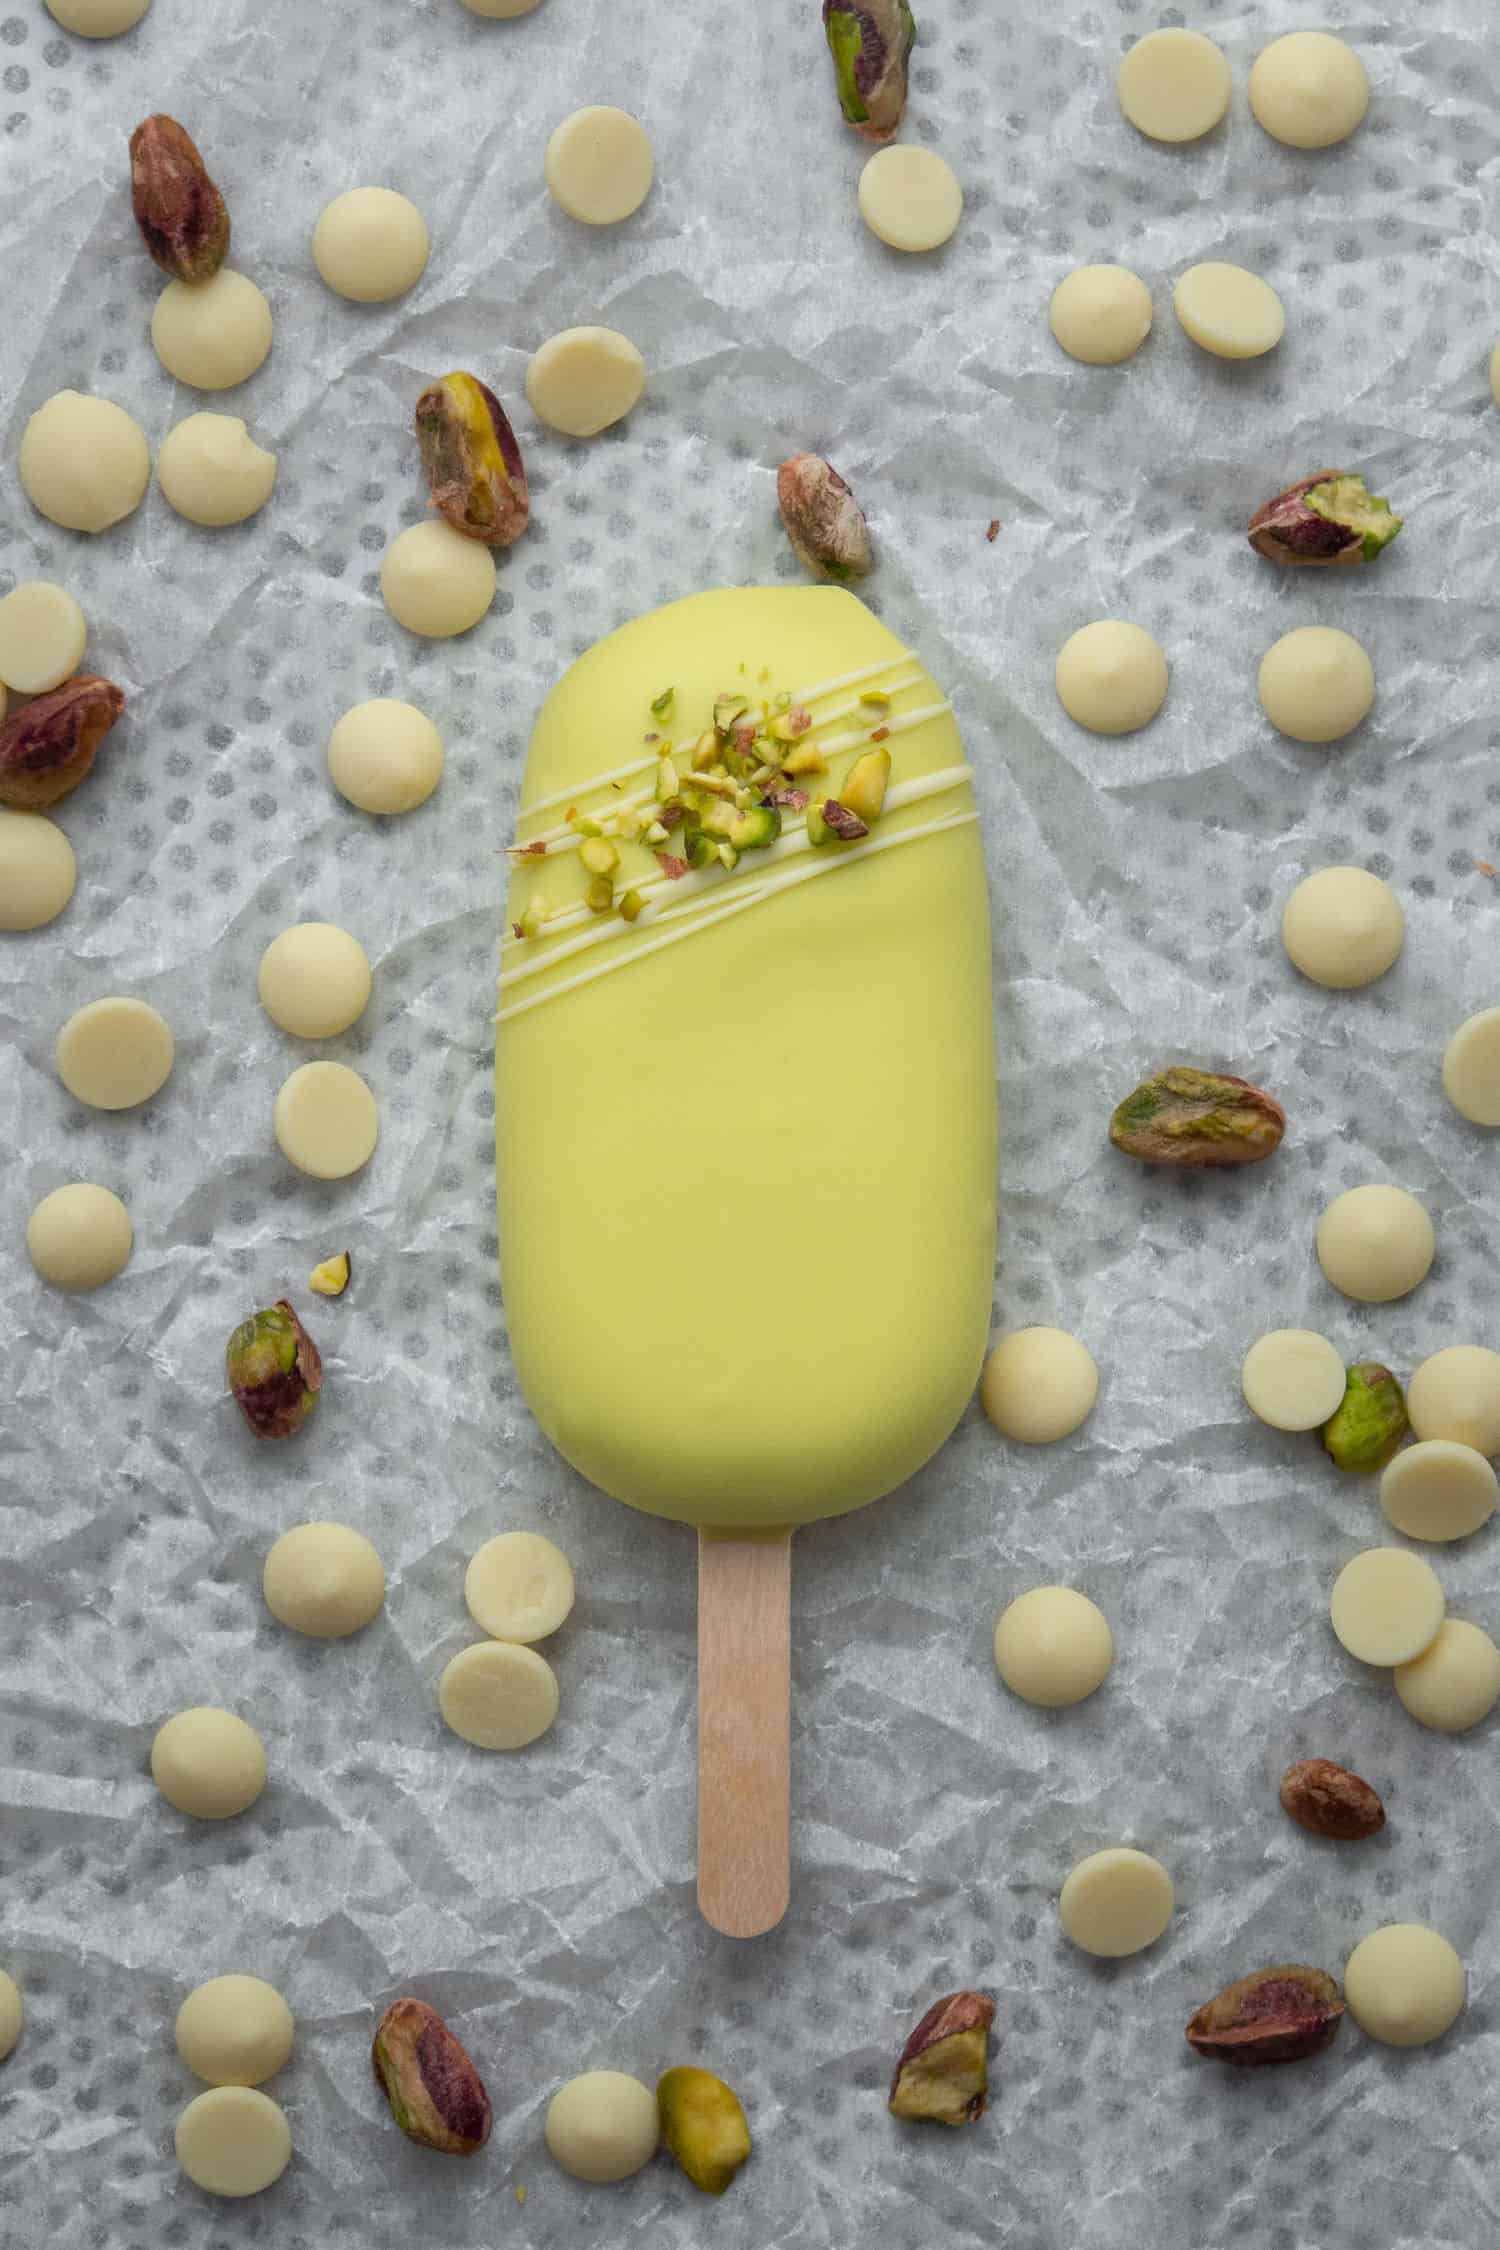 A Pistachio Ice cream bar on a white baking sheet decorated with white chocolate and pistachio.